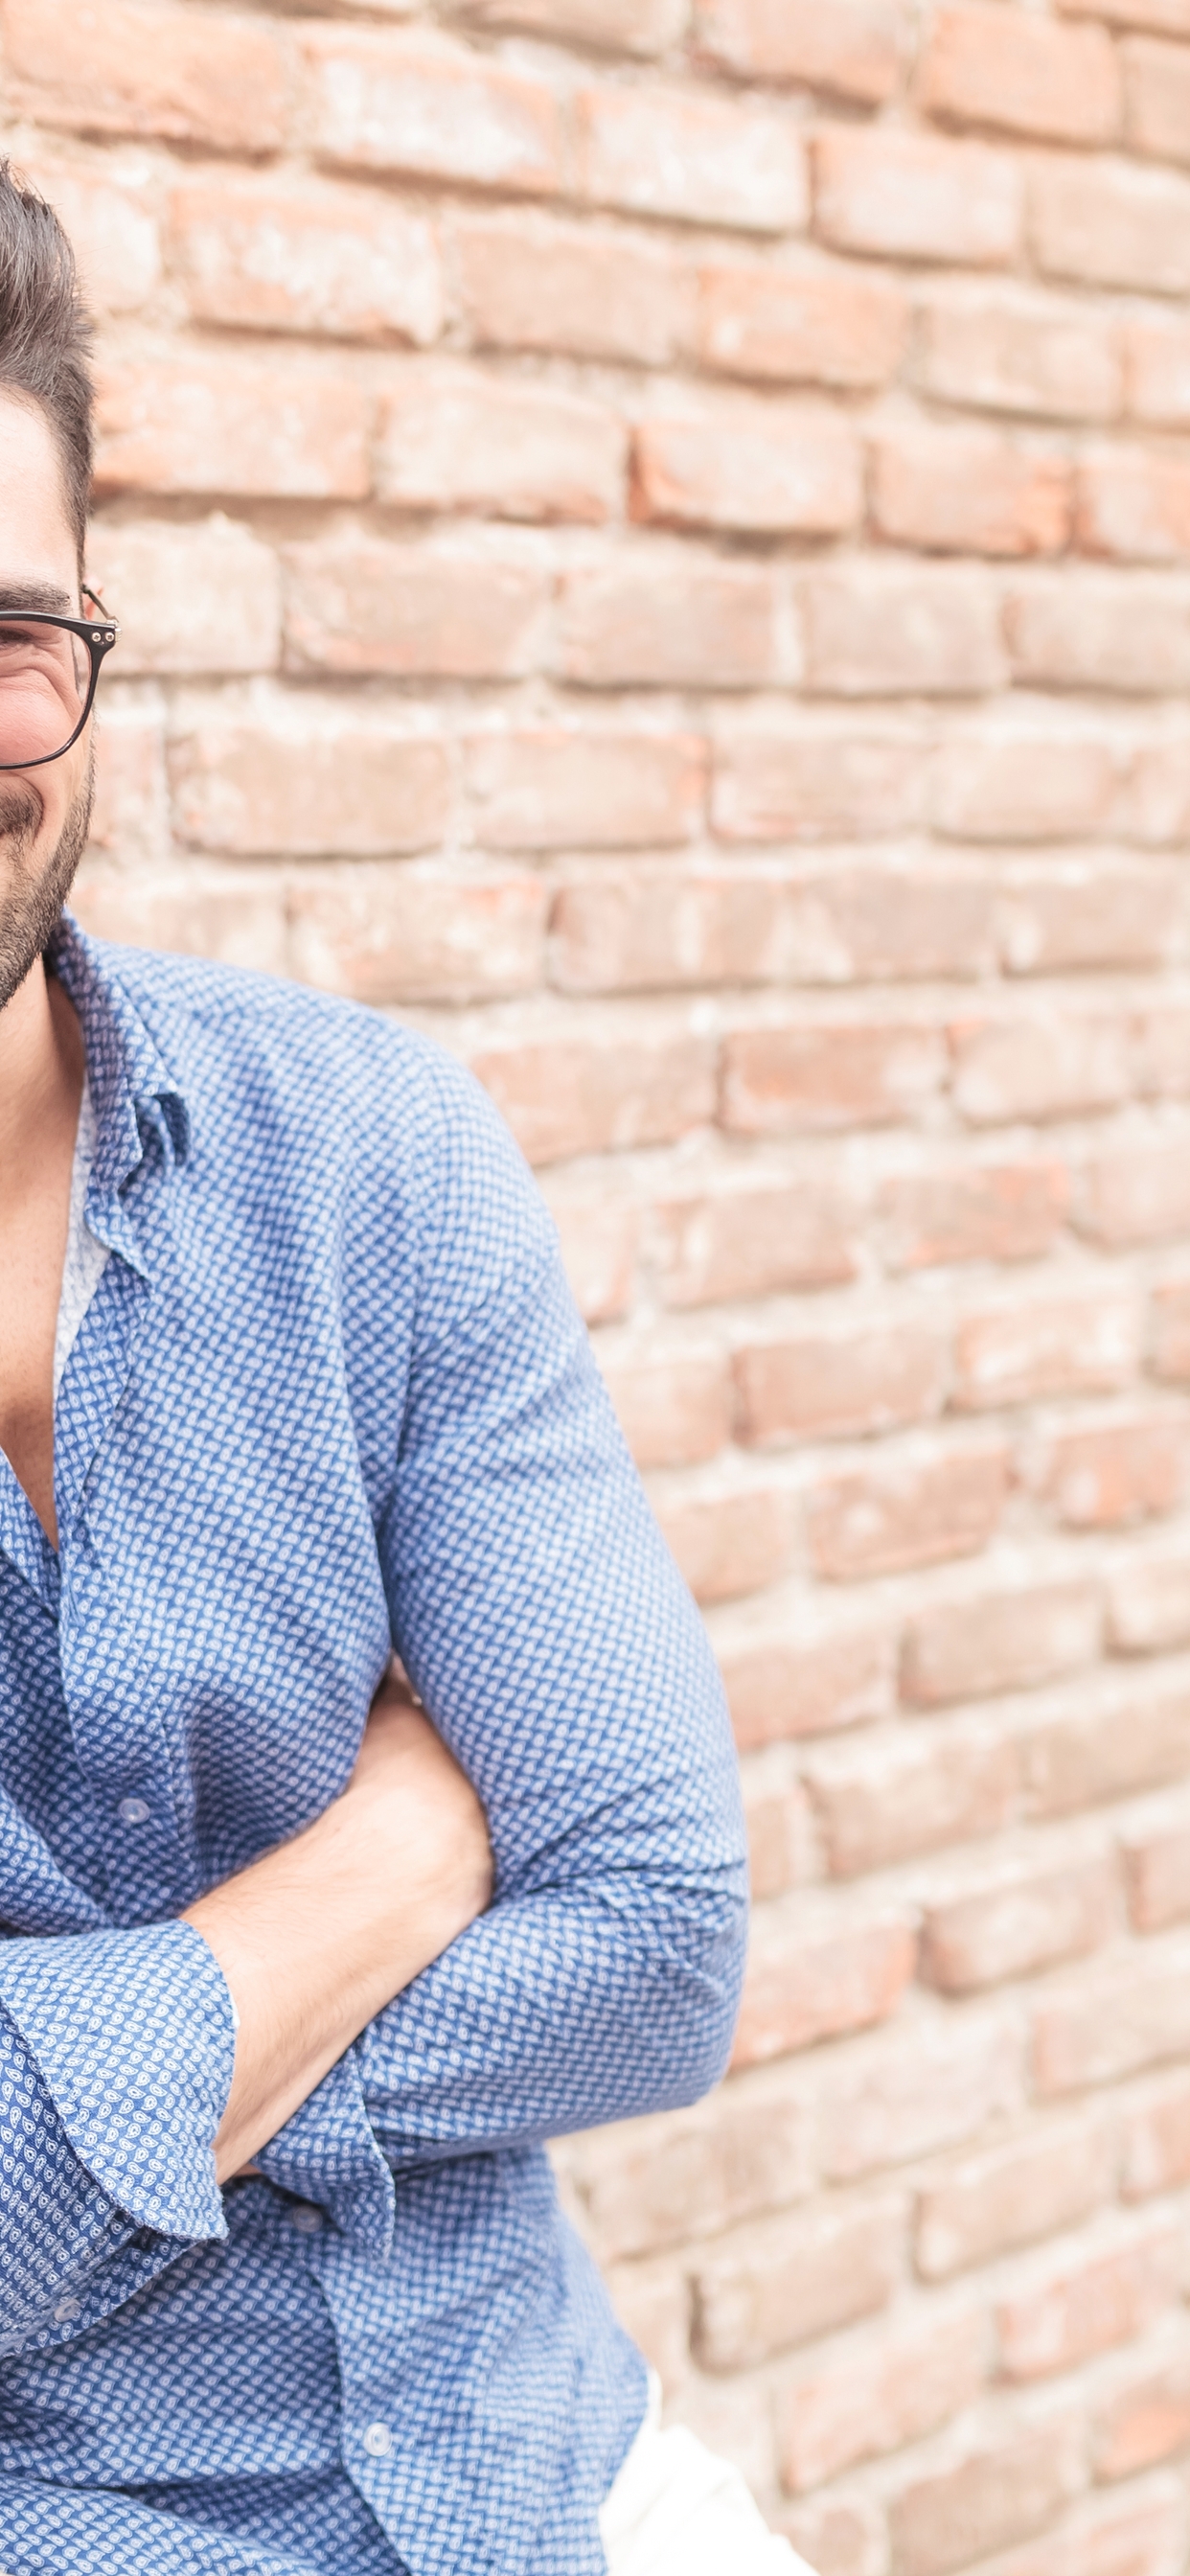 Image: Man, smile, look, face, glasses, unshaven, shirt, style